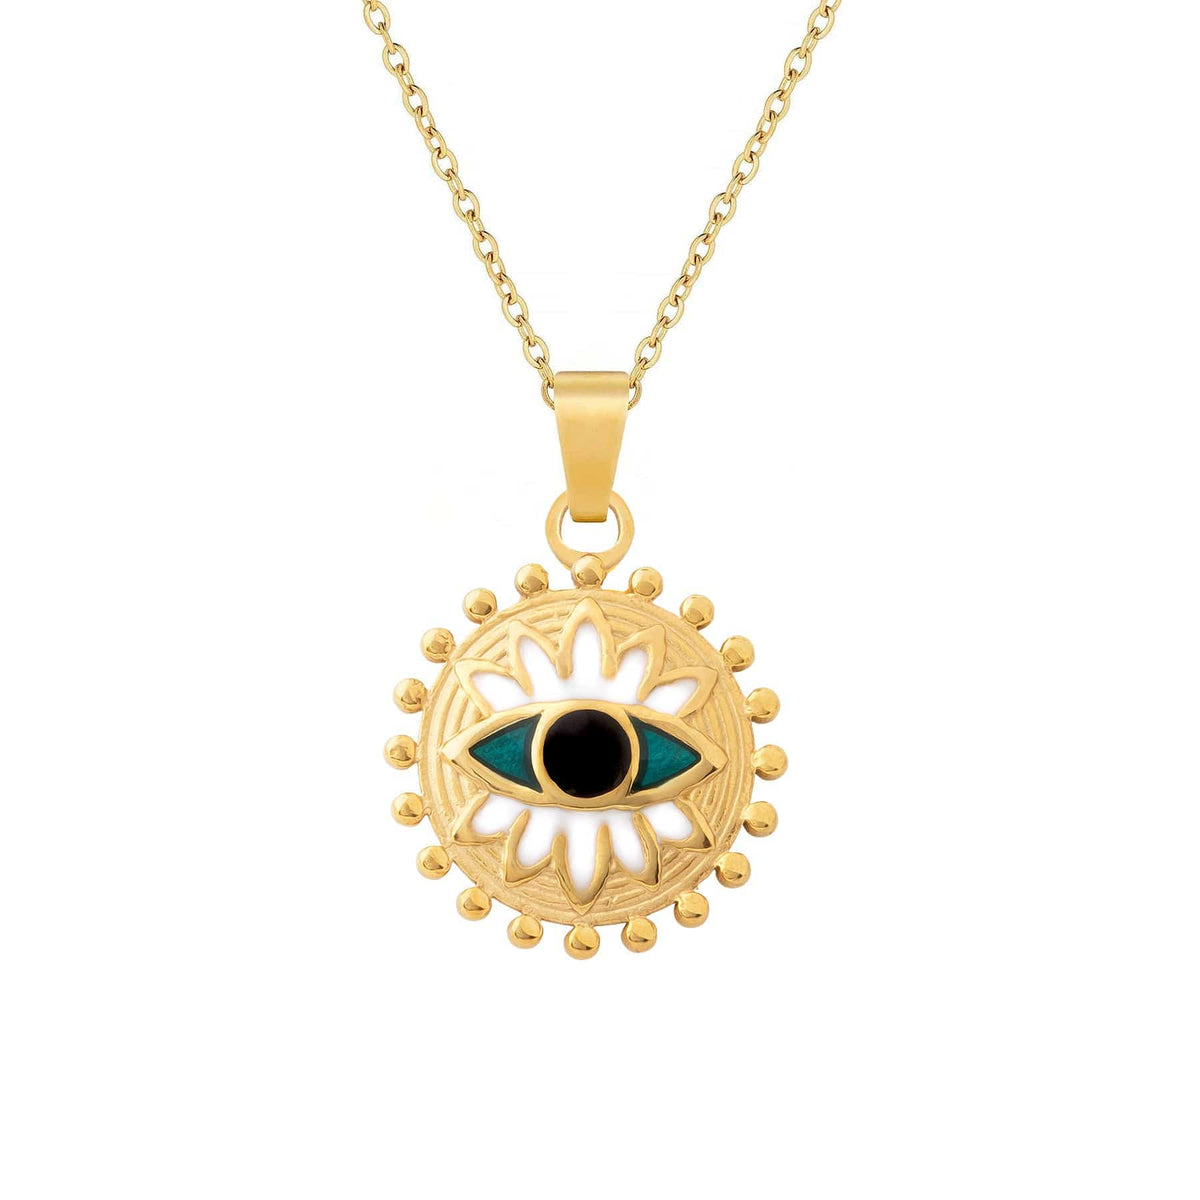 BohoMoon Stainless Steel Constance Necklace Gold